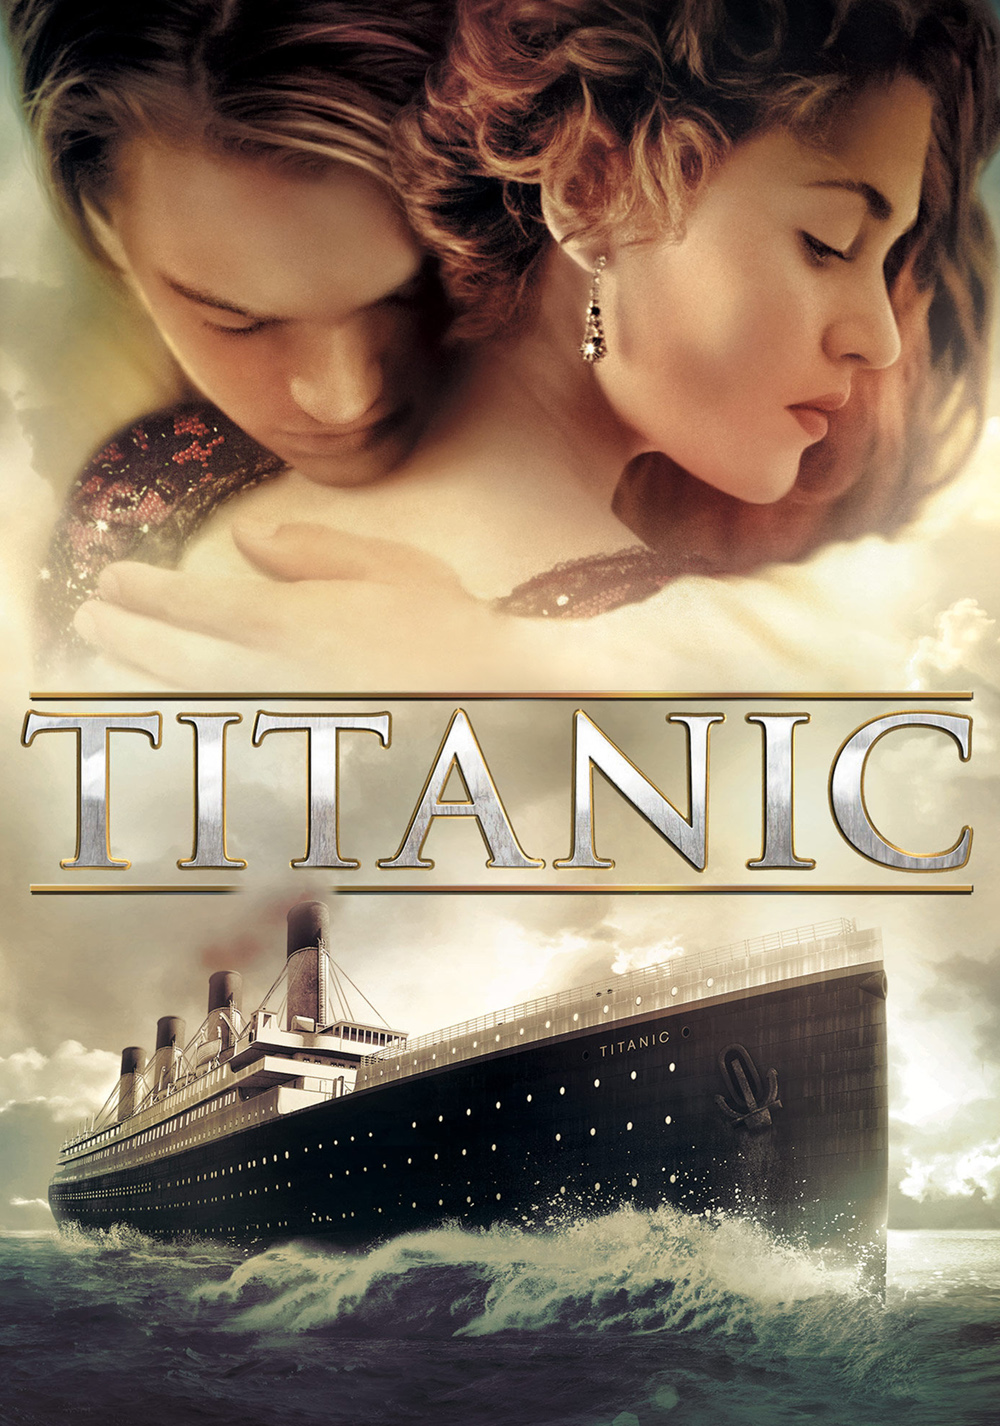 Titanic Movie Poster - ID: 140028 - Image Abyss